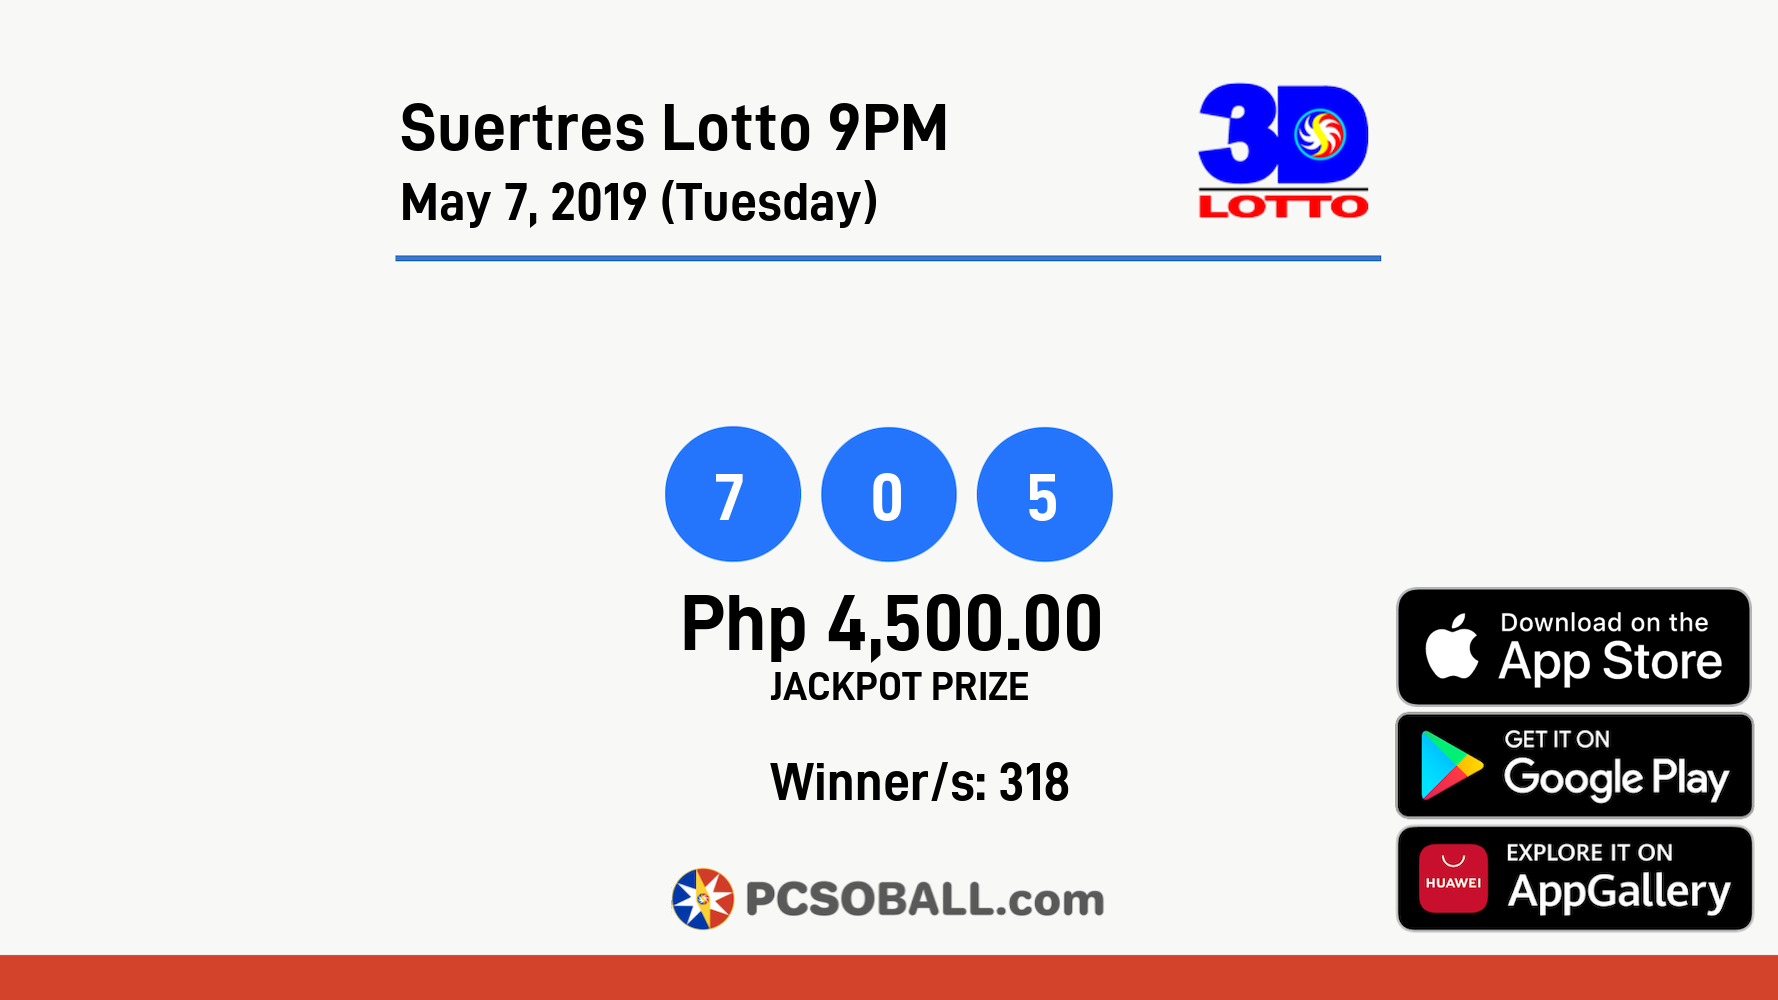 Suertres Lotto 9PM May 7, 2019 (Tuesday) Result